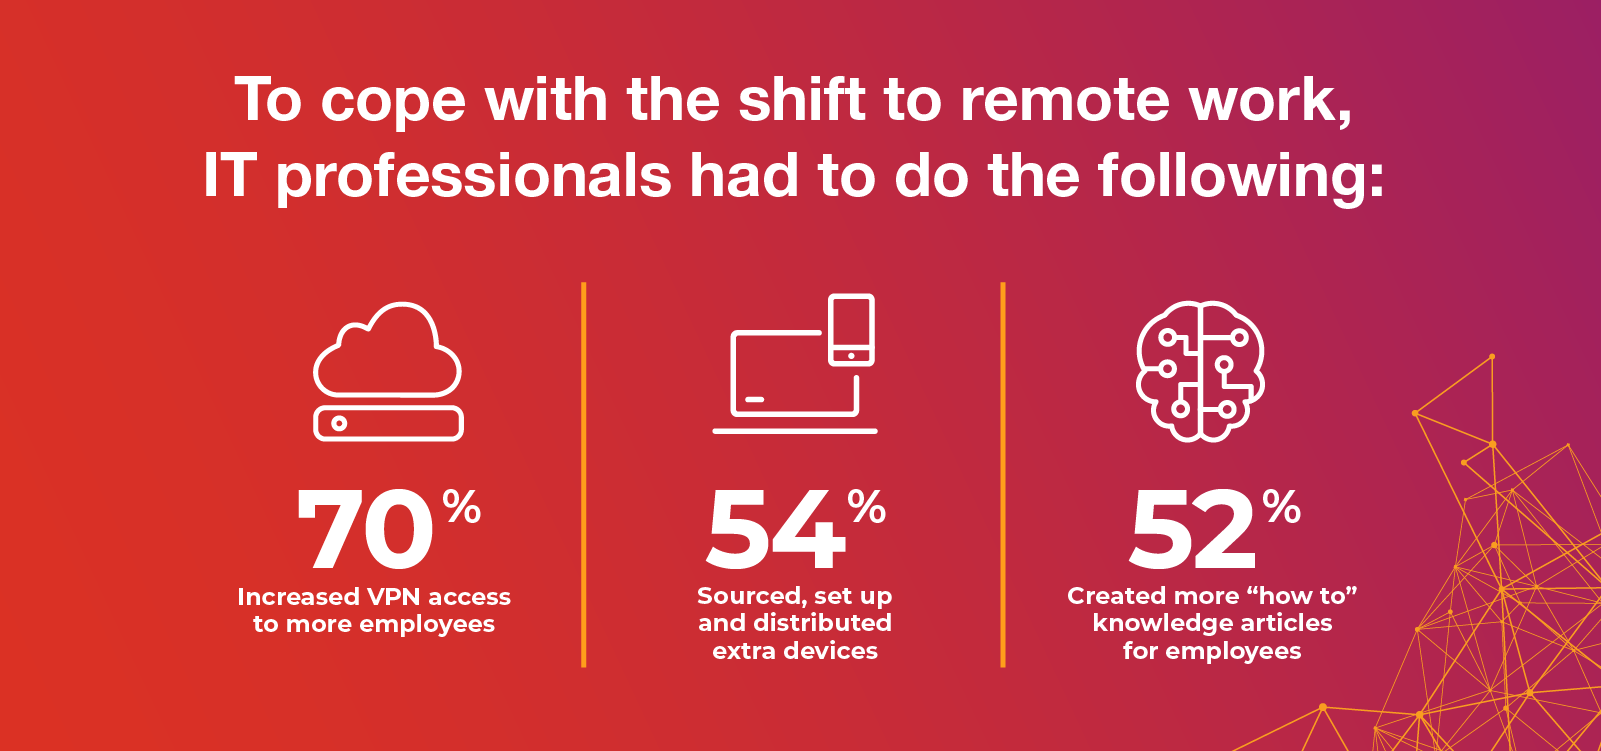 To cope with the shift to remote work, IT professionals had to do the following.